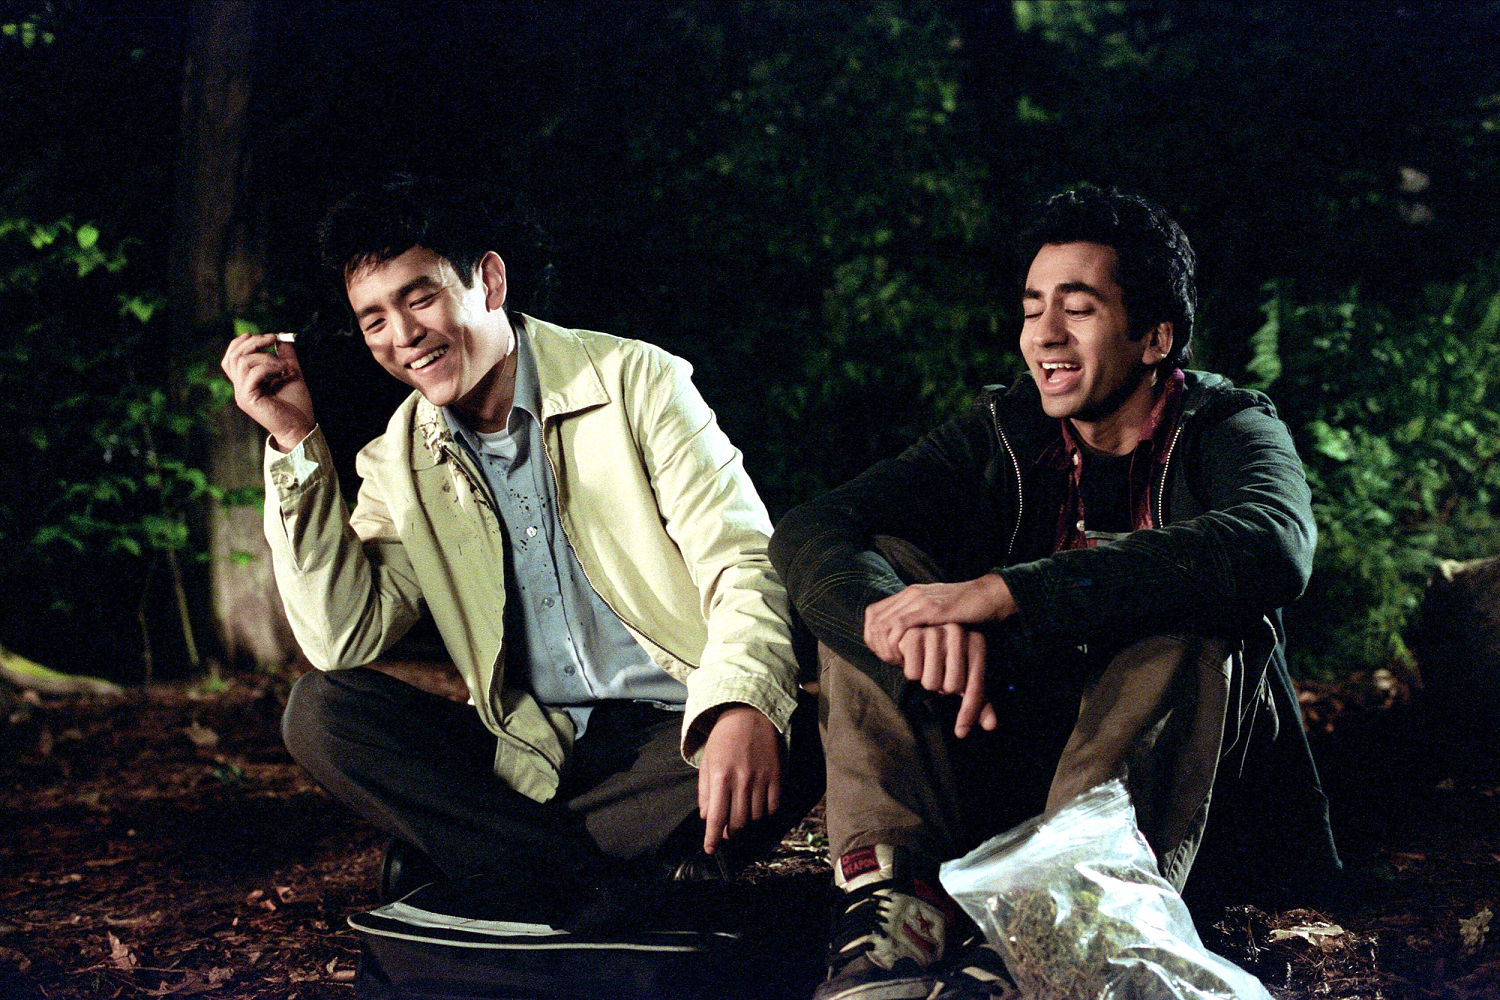 asian americans reflect on how ‘harold & kumar’ helped weed out stereotypes